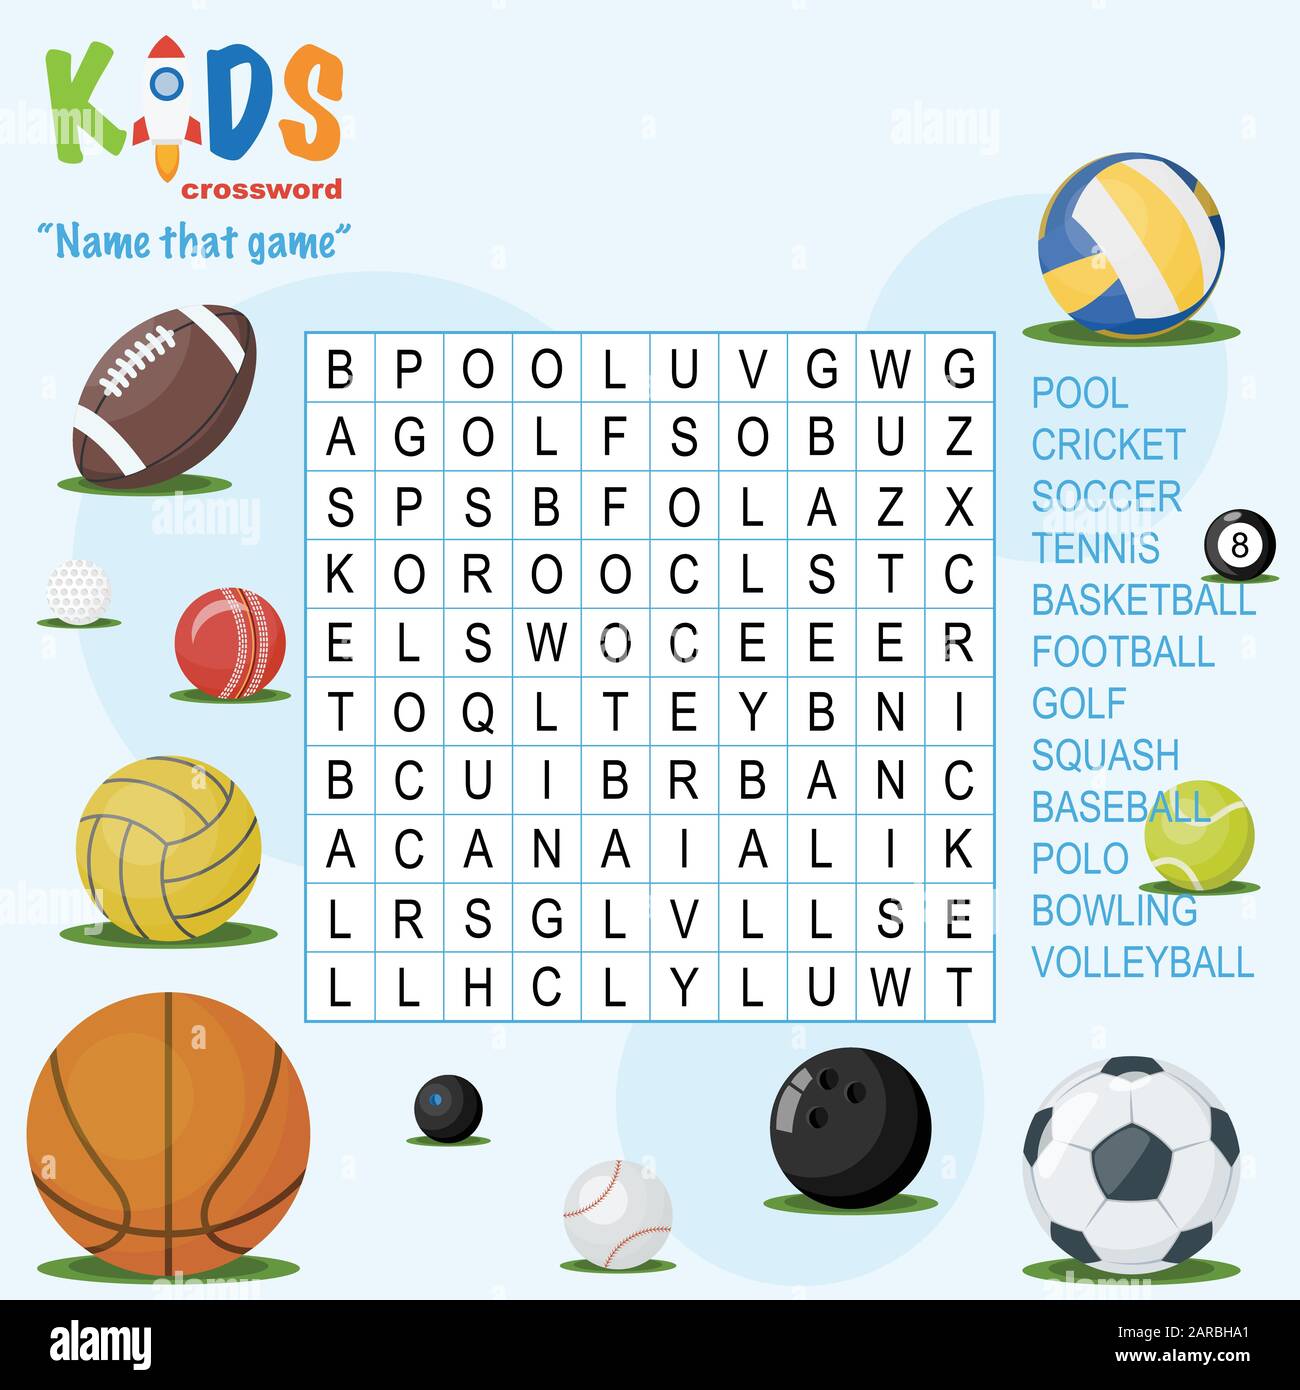 Easy crossword puzzle #39 Name that game #39 for children in elementary and